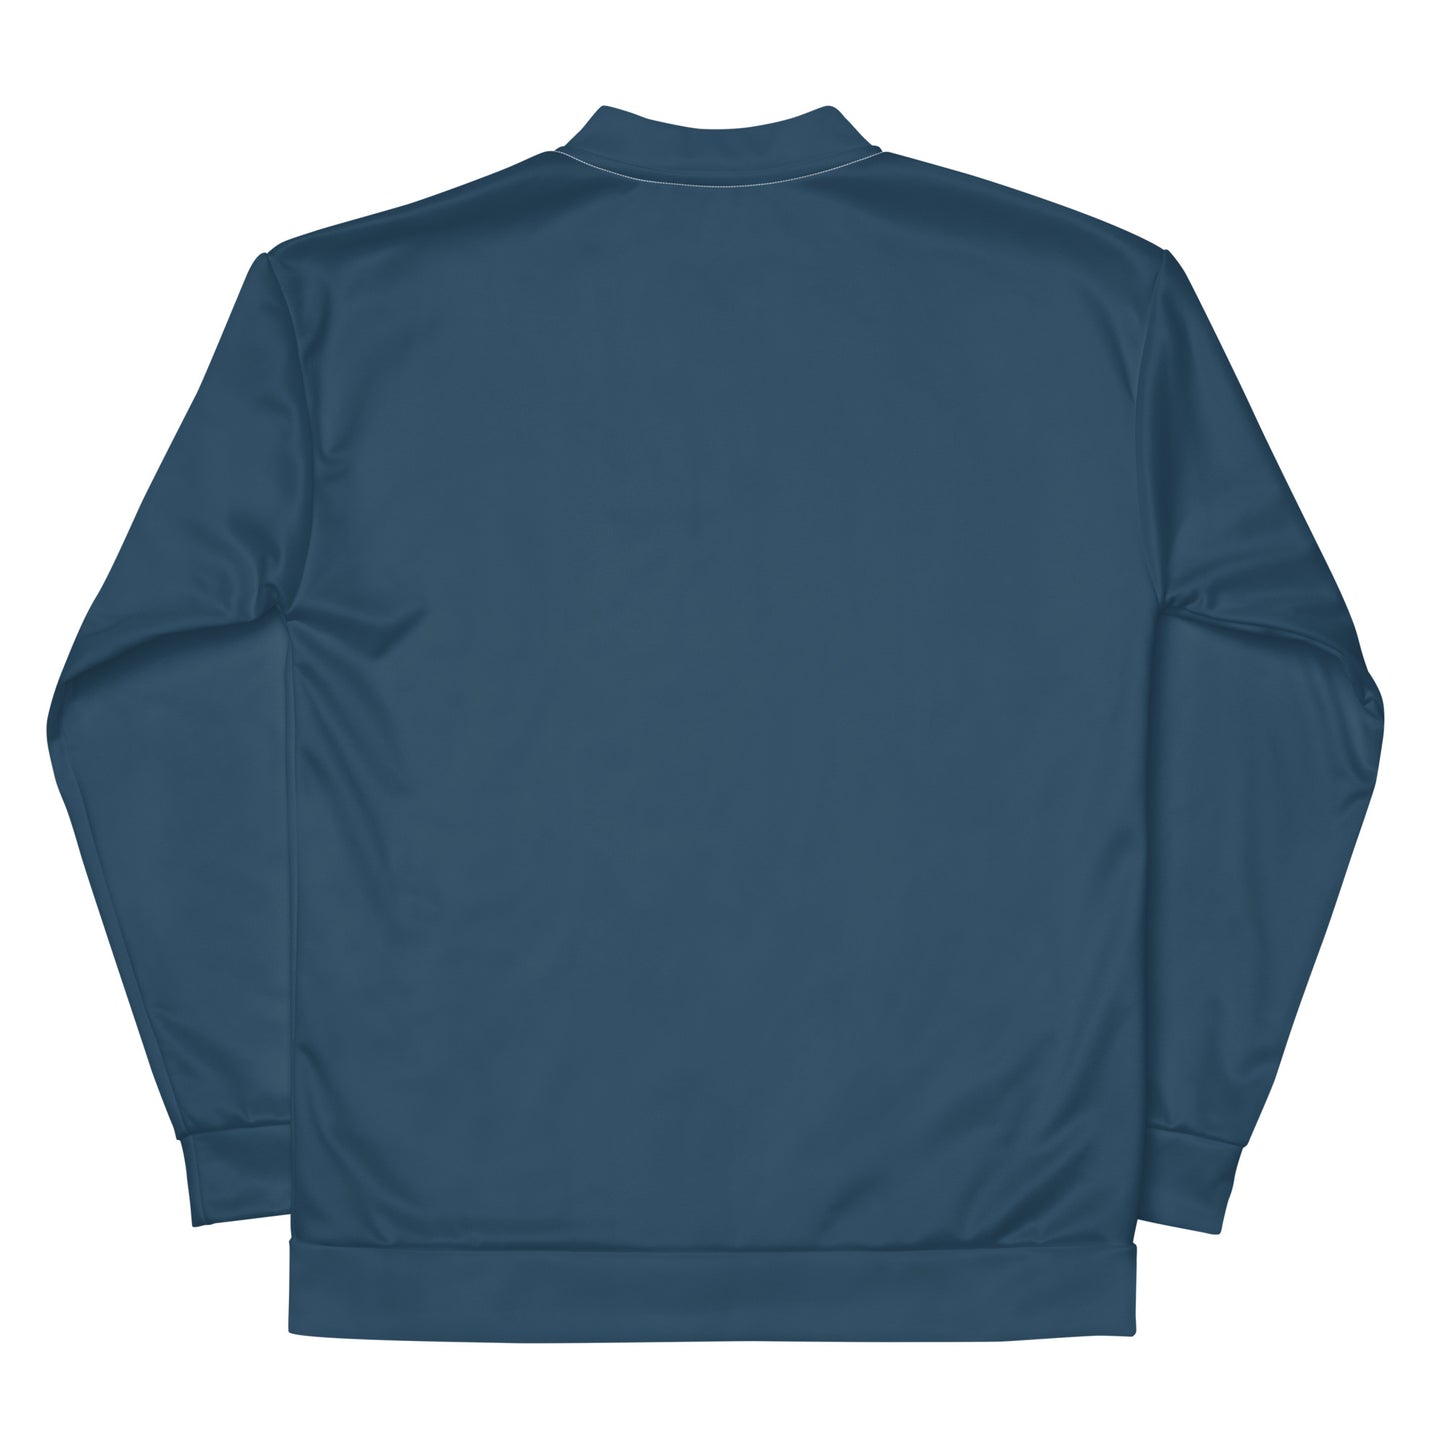 Ocean Blue Climate Change Global Warming Statement - Sustainably Made Bomber Jacket